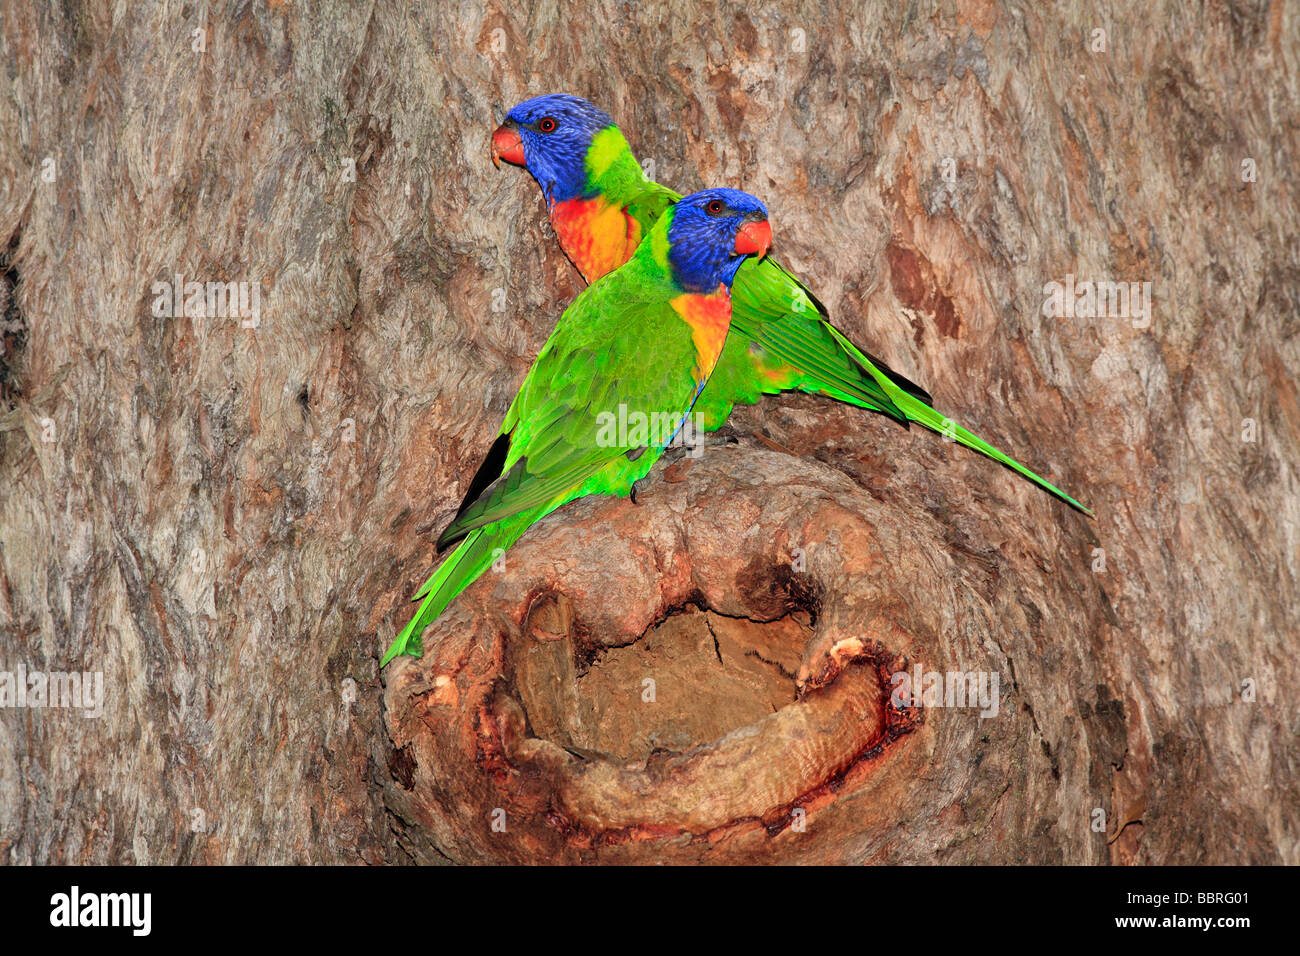 Rainbow Lorikeets, Trichoglossus haematodus, mating pair outside their nest which is built in the hollow of a gum tree, Australia Stock Photo